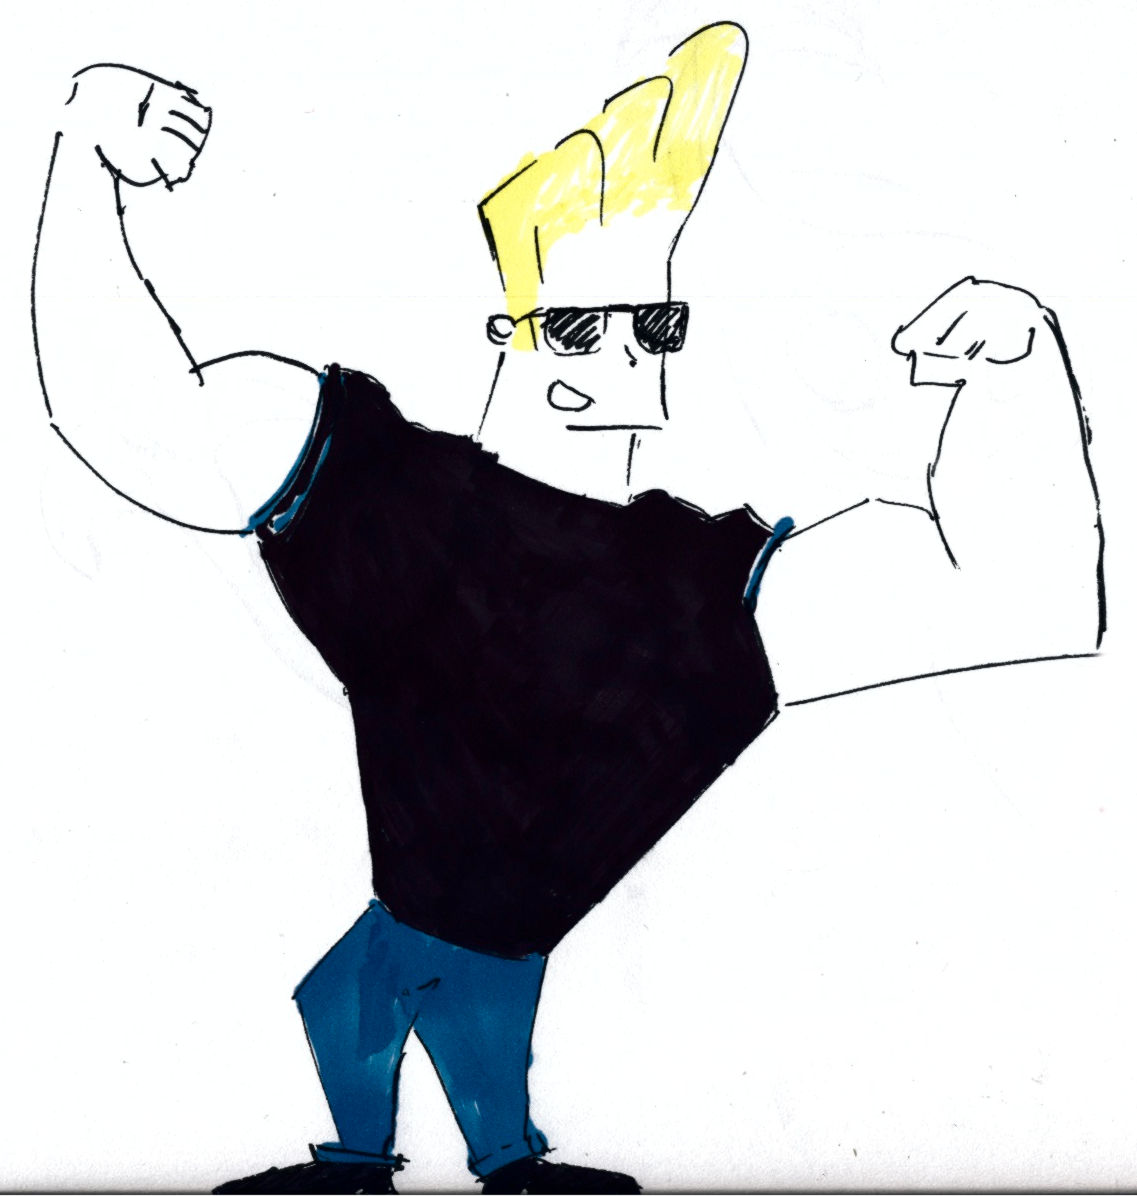 Maybe I am late, but I look goood. Johnny Bravo representing the frontend